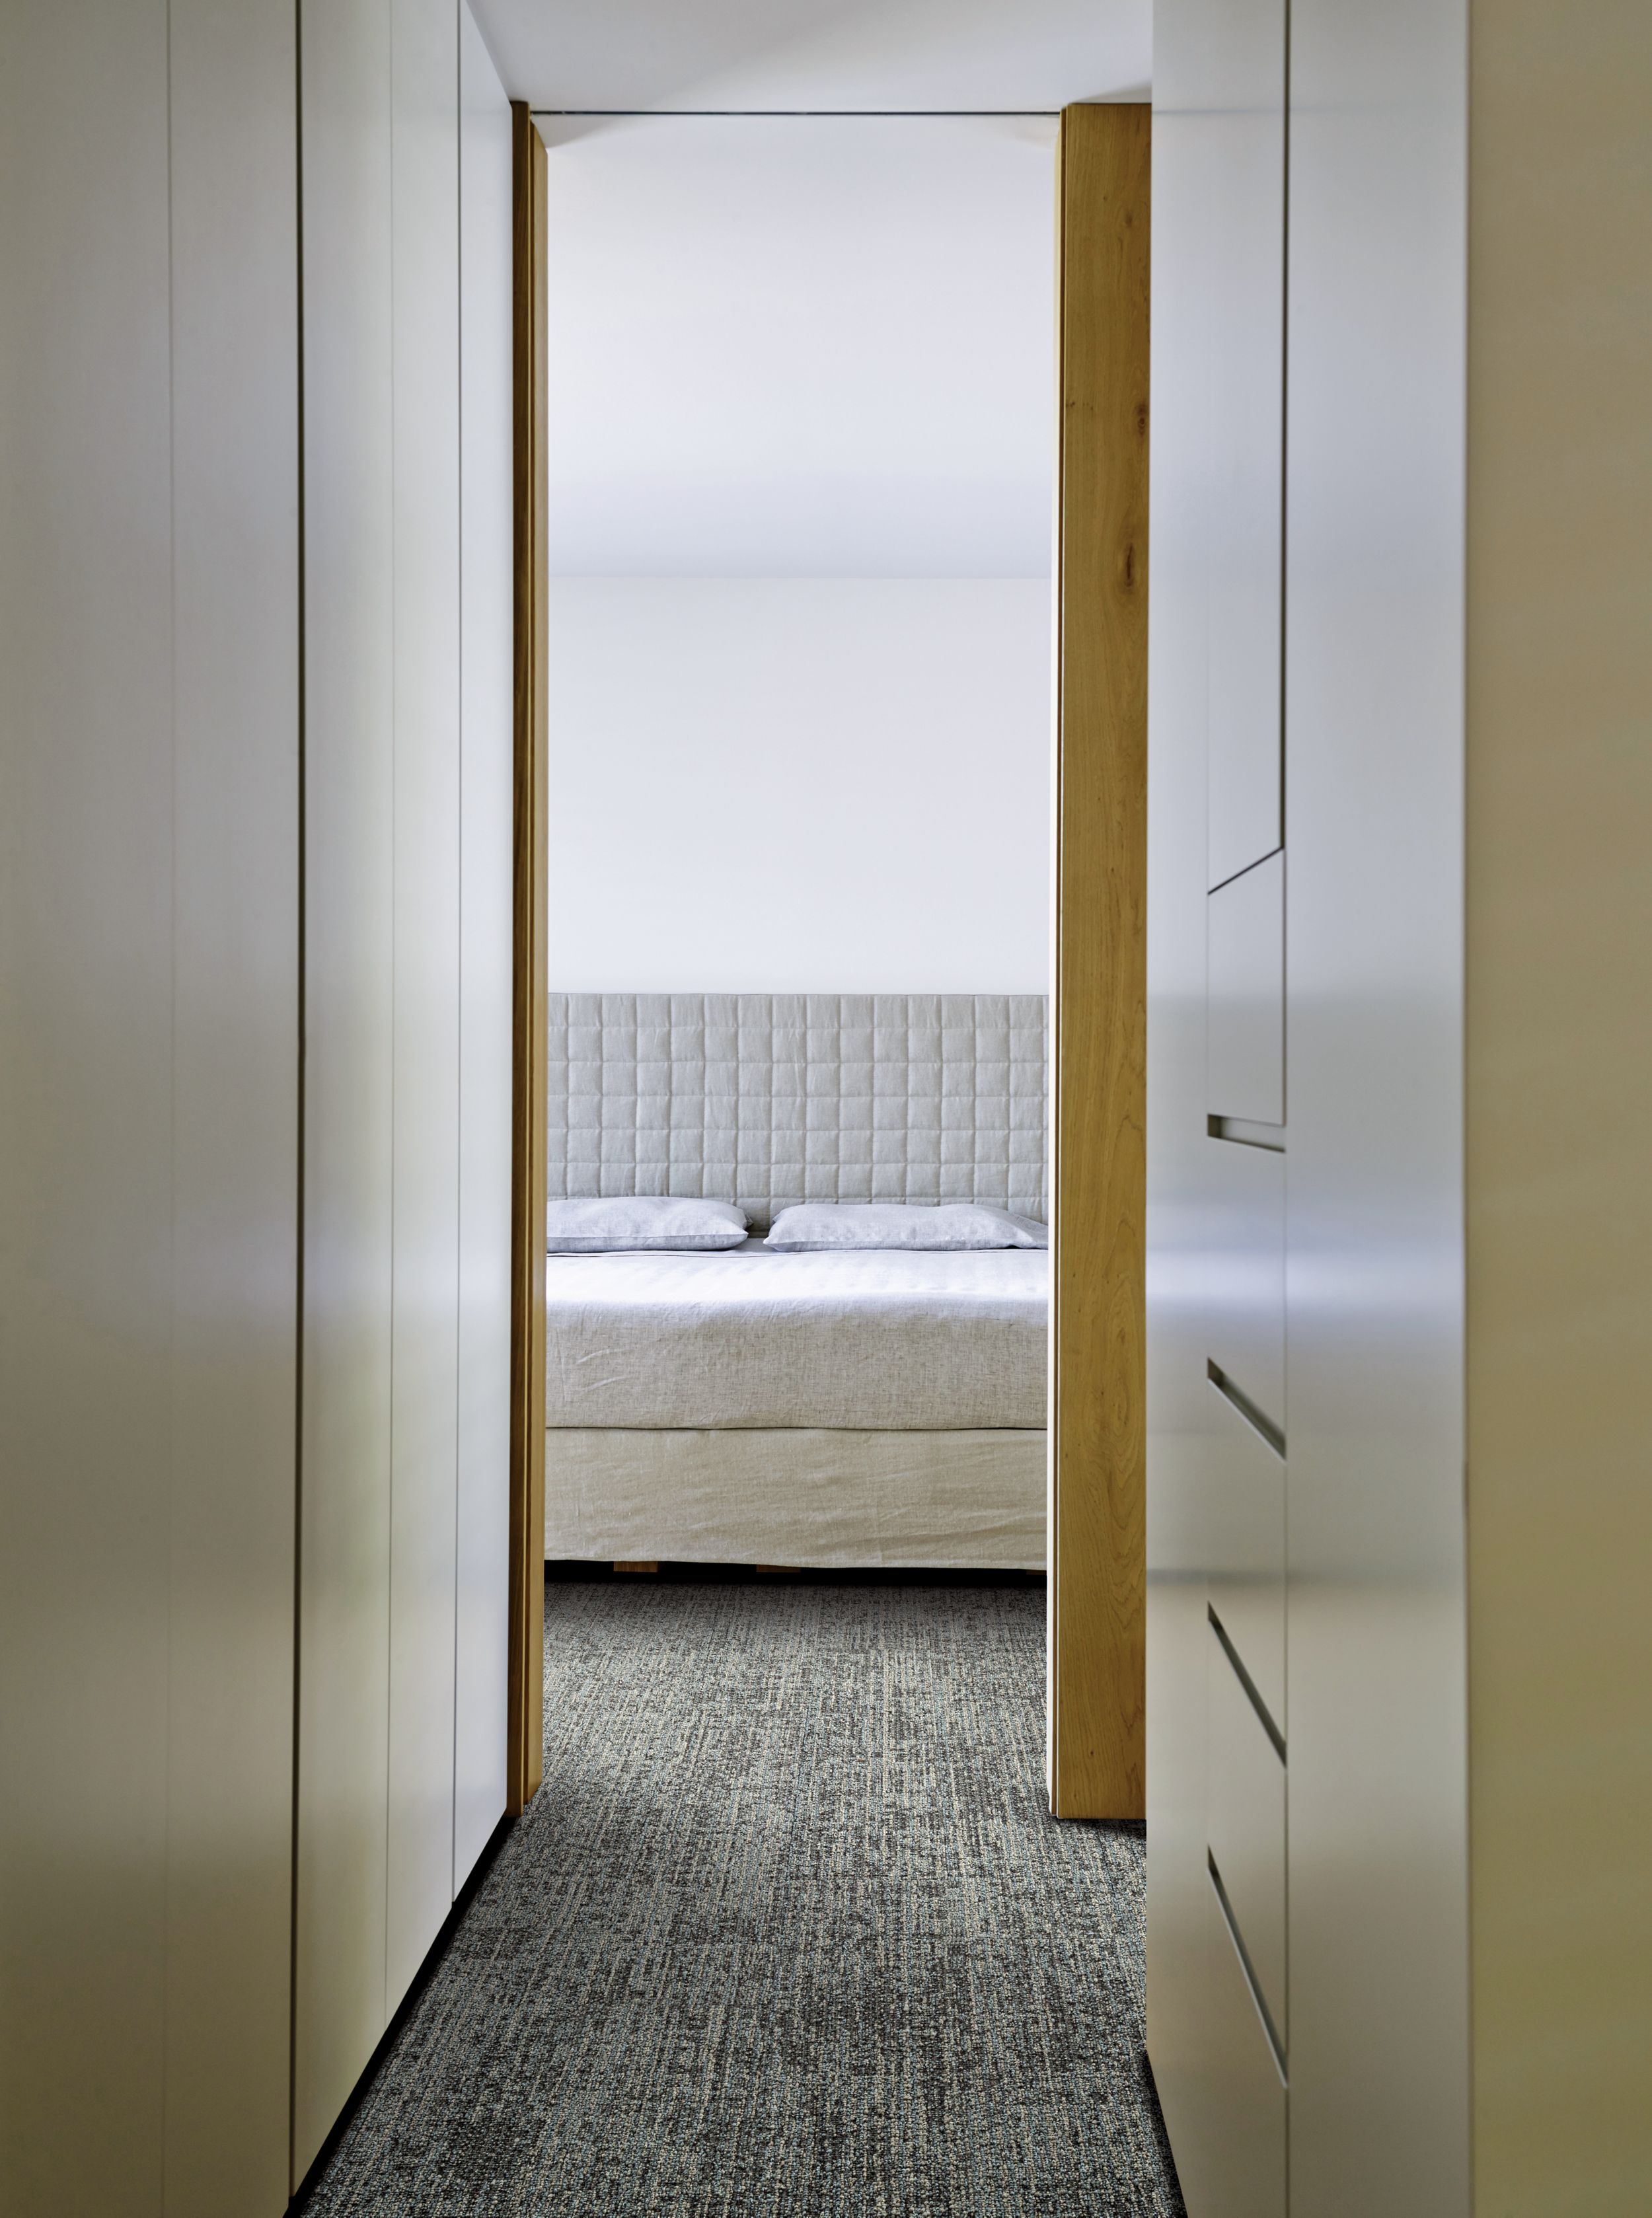 Narrow view off Interface RMS 511 plank carpet tile in hotel guest room numéro d’image 1